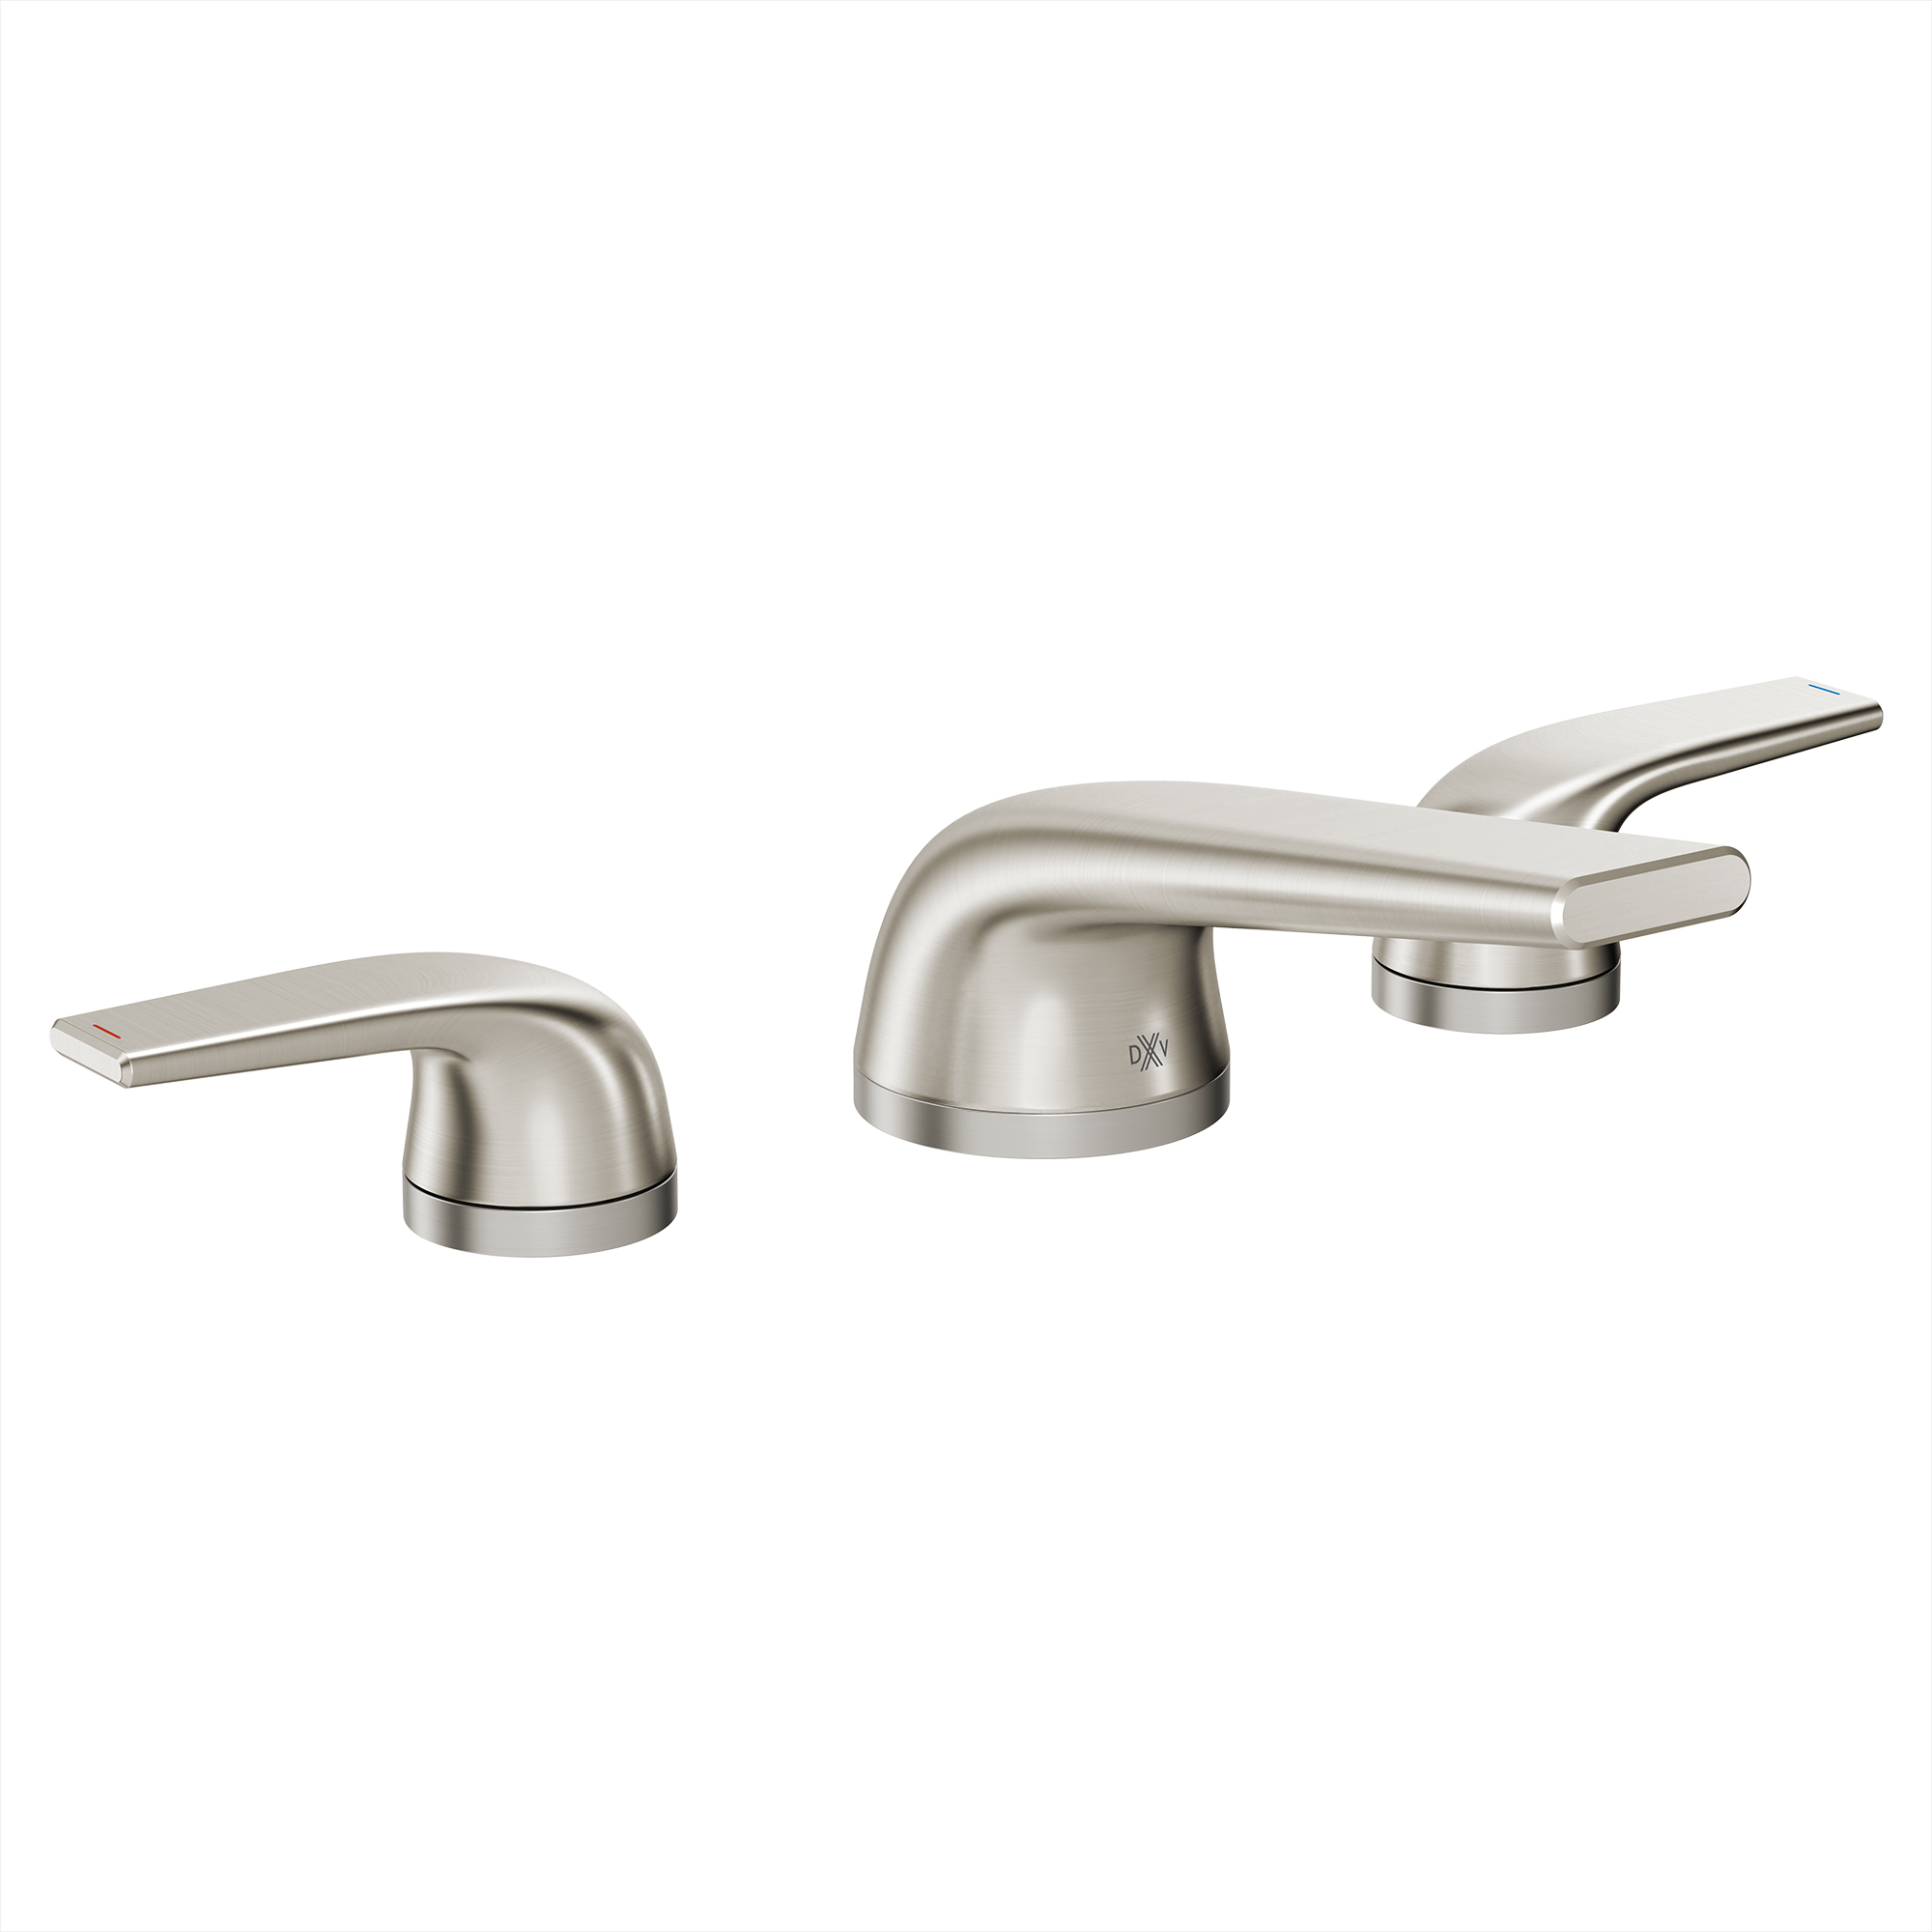 DXV Modulus 2-Handle Widespread Bathroom Faucet with Indicator Markings and Lever Handles